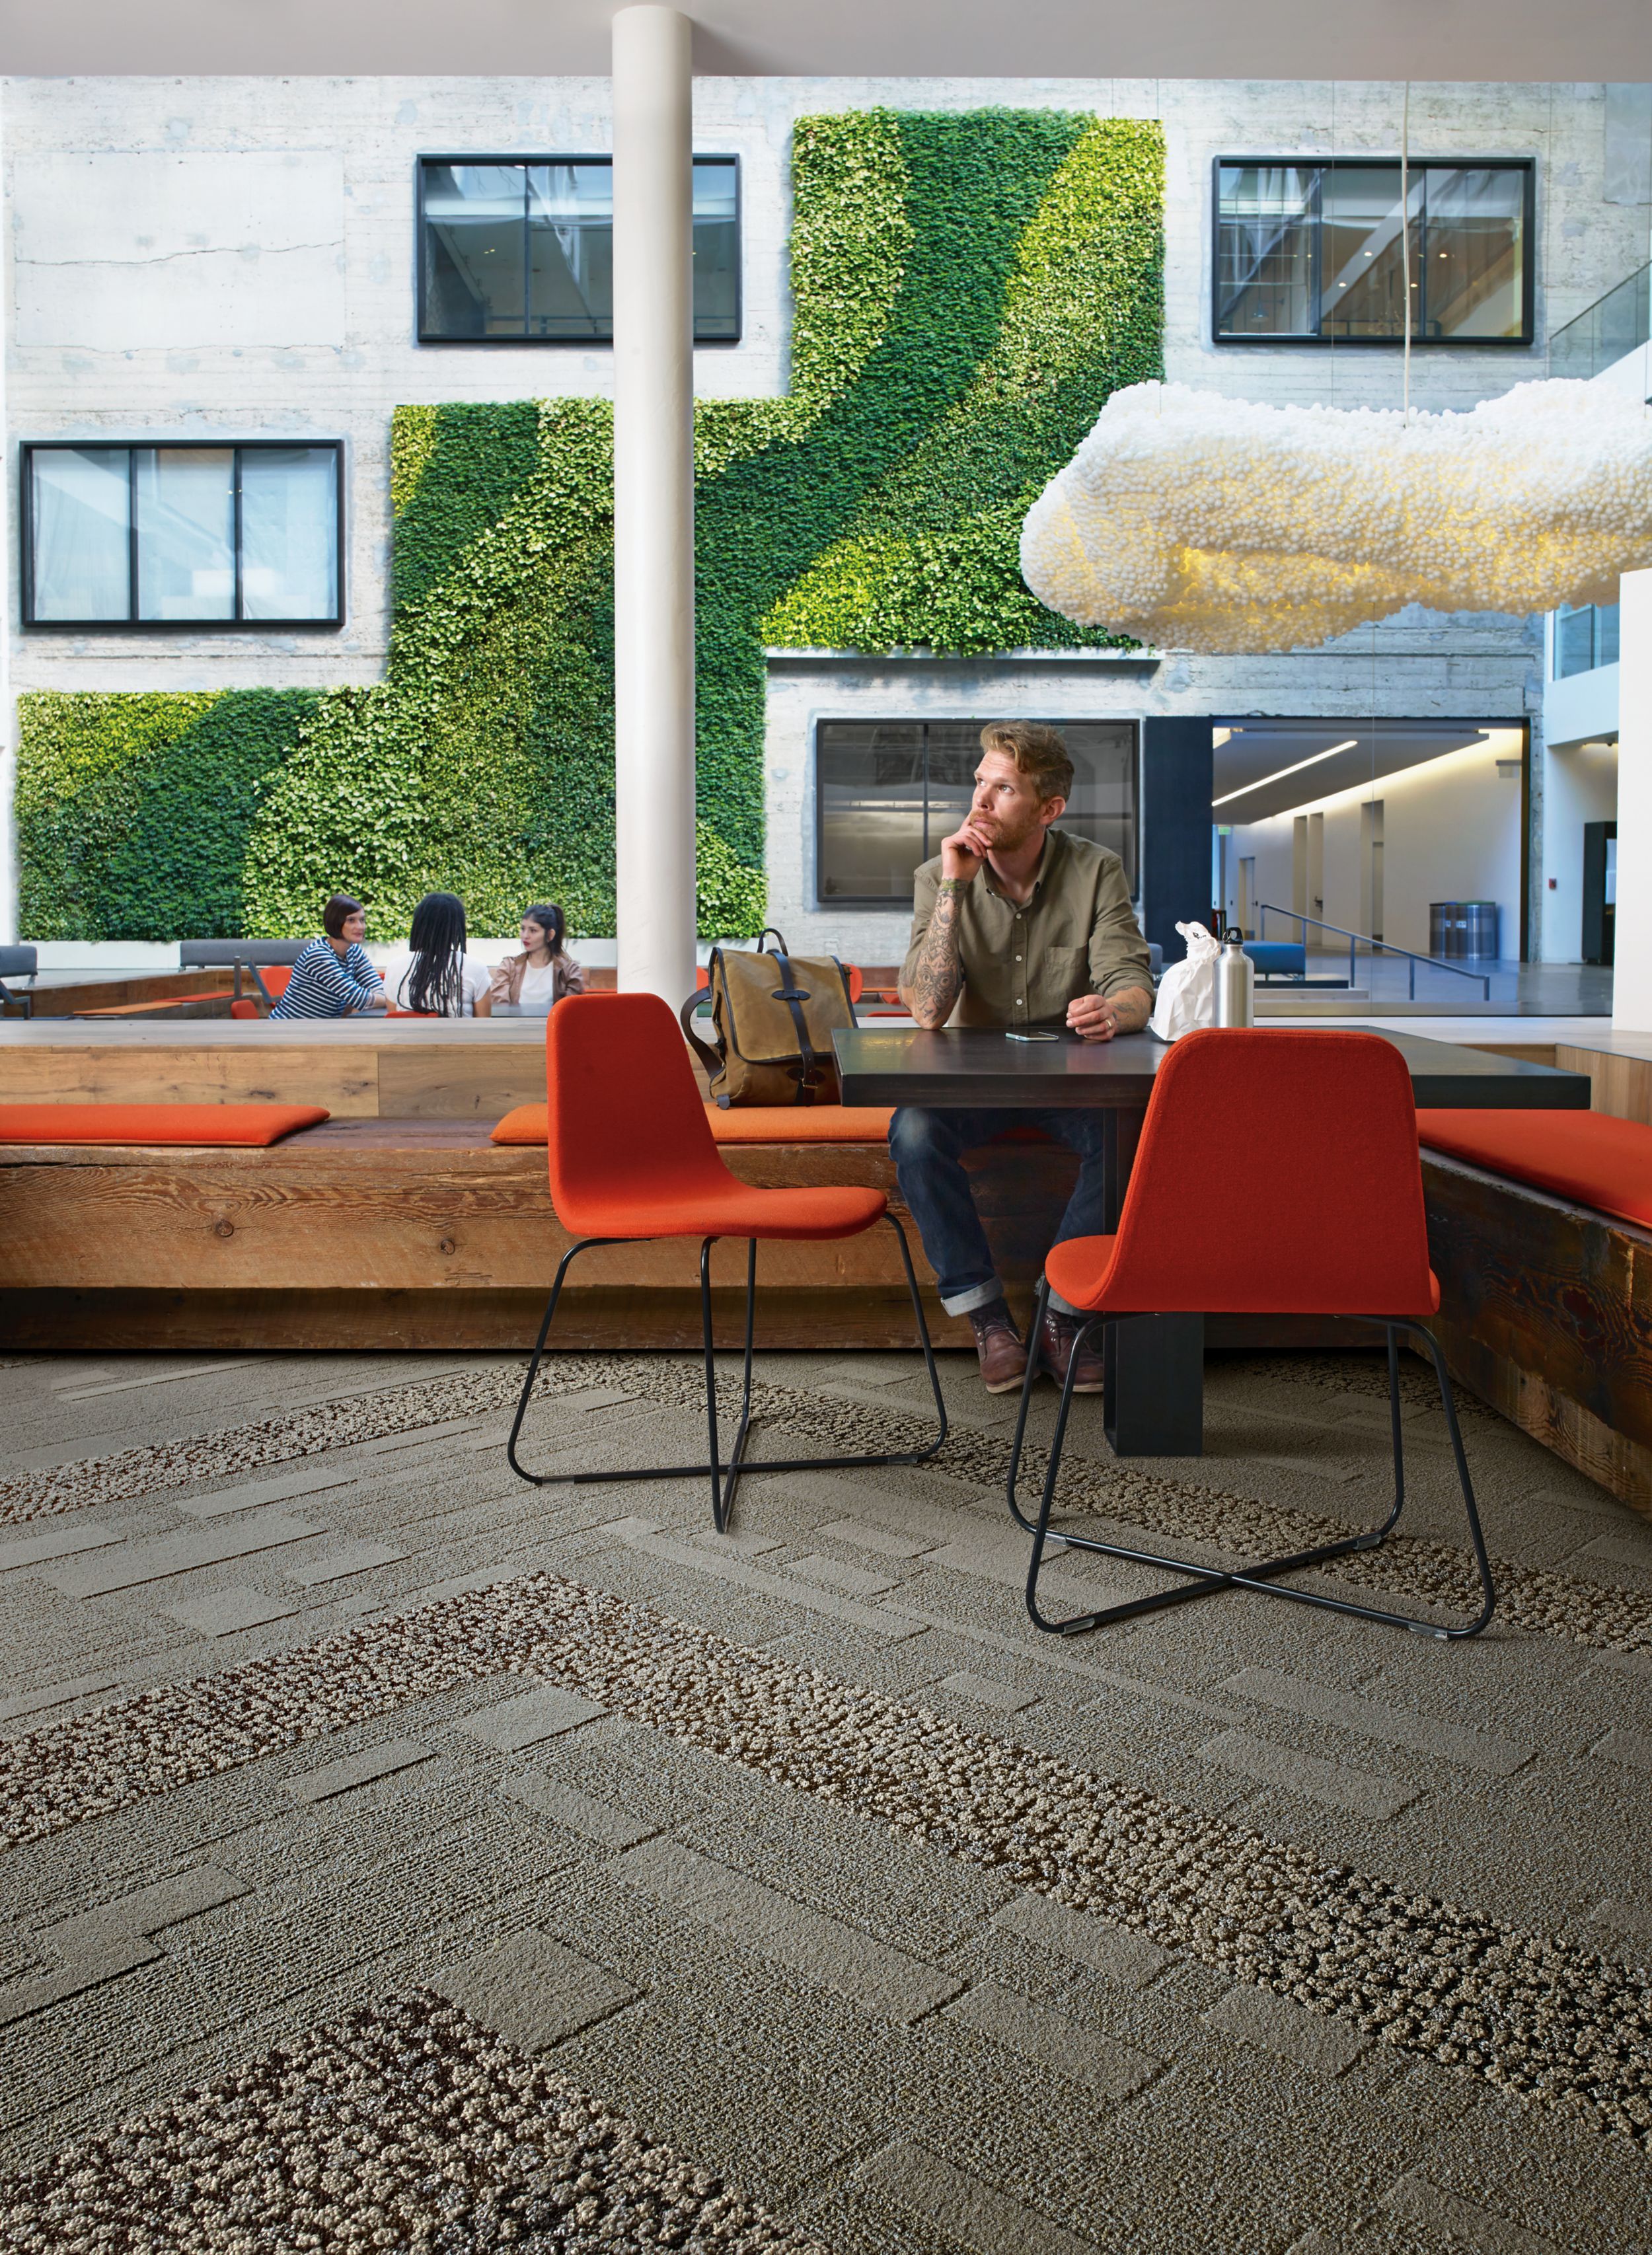 Interface EM552 plank carpet tile with man sitting at table with lunch and group meeting in front of vine wall in the background  imagen número 7